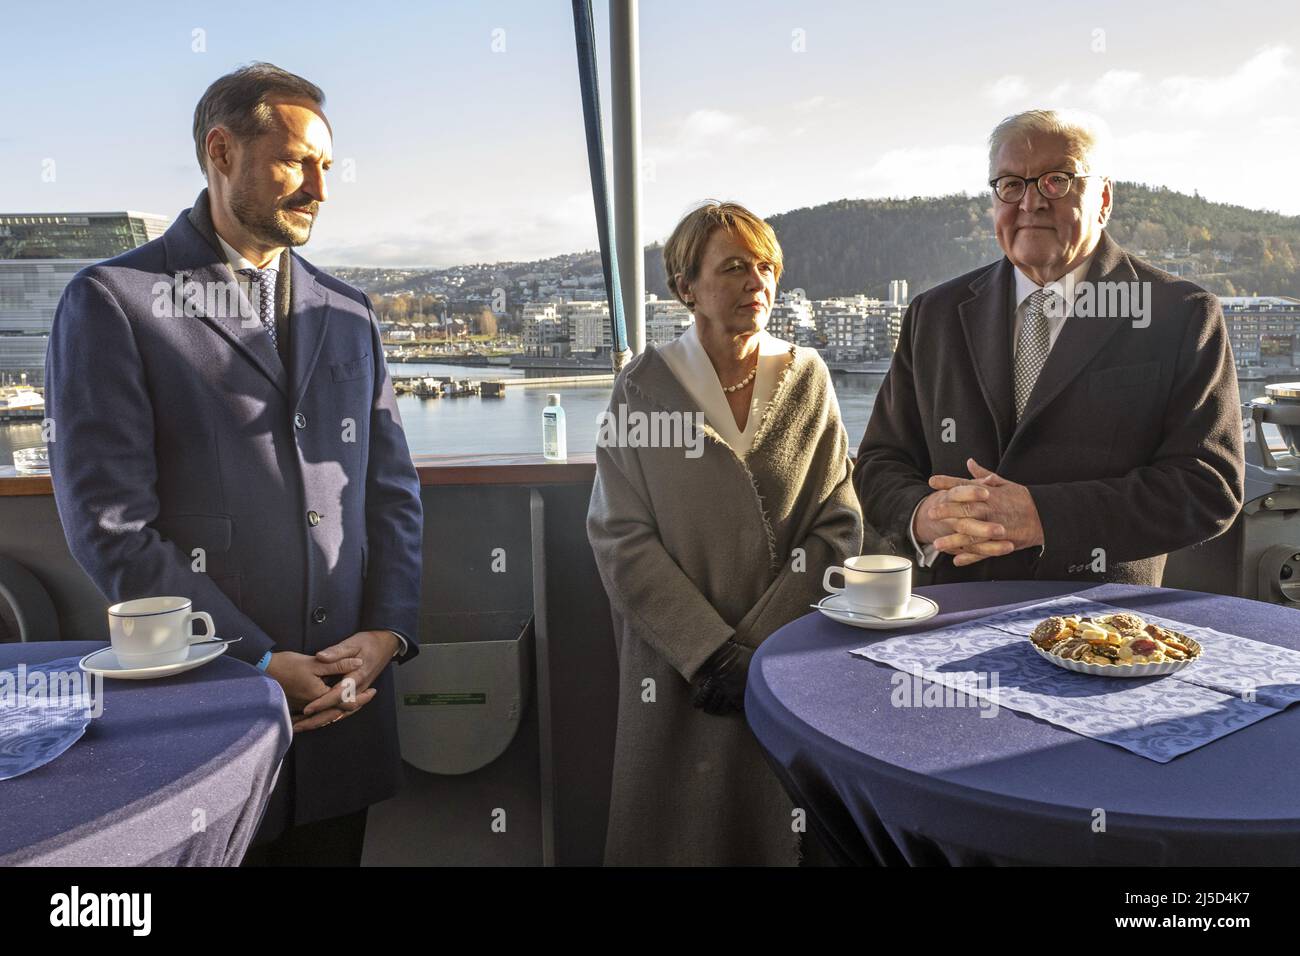 Norway, Oslo, 04.11.2021. Official visit of the German President to Norway on 04.11.2021. Visit of the German Navy's task group supply ship Berlin at the port of Oslo. From left to right: Crown Prince Haakon Magnus, Mrs. Elke Buedenbender and Frank-Walter Steinmeier, German President. [automated translation] Stock Photo